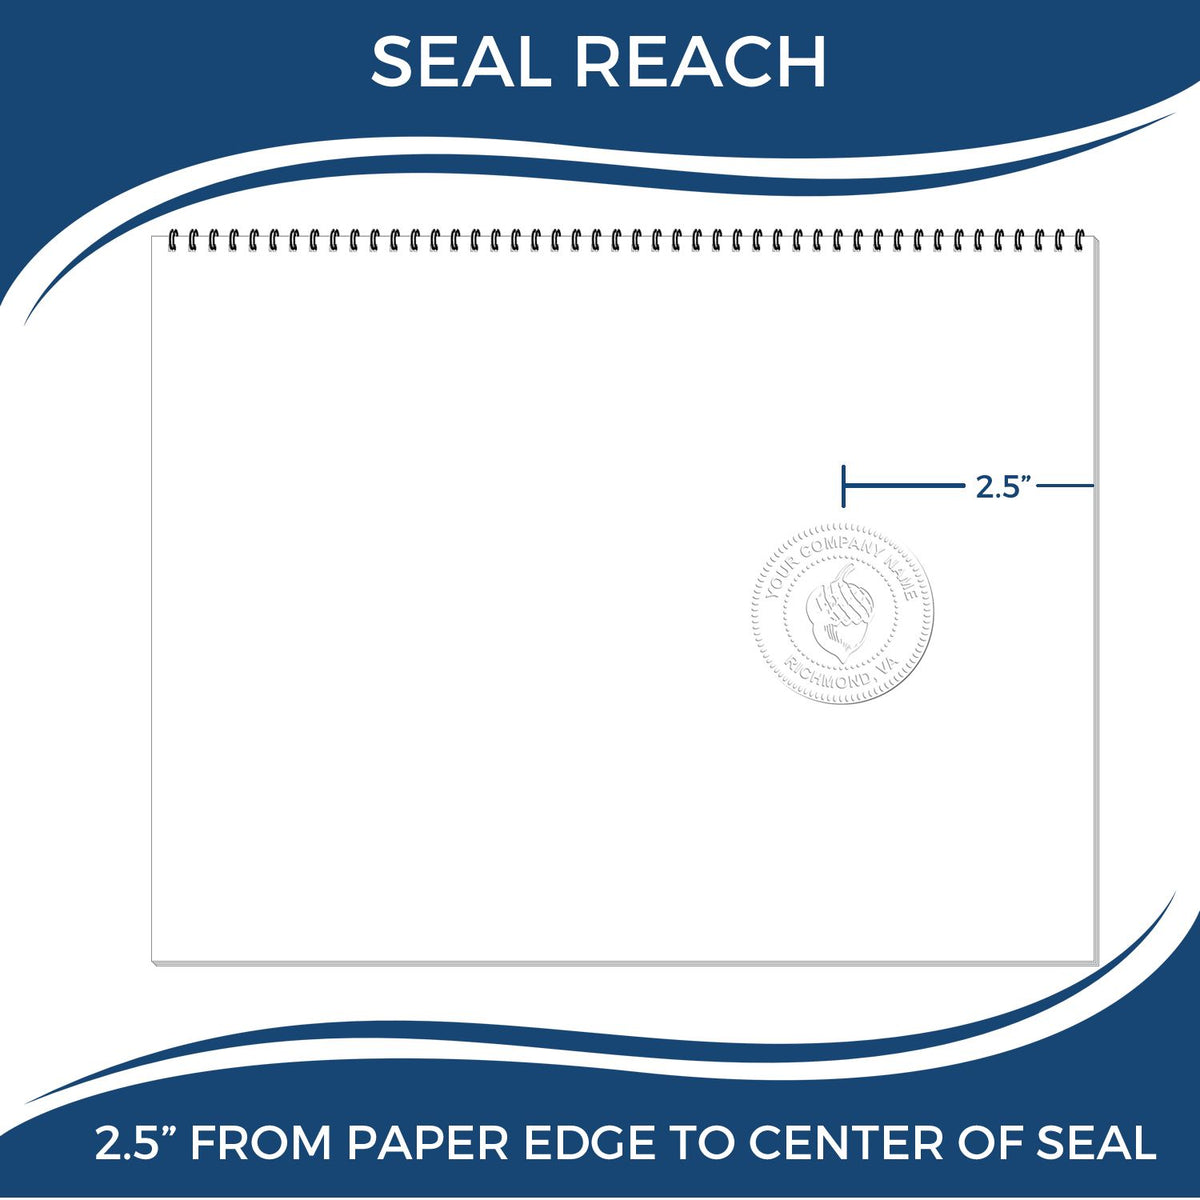 An infographic showing the seal reach which is represented by a ruler and a miniature seal image of the Long Reach North Dakota PE Seal